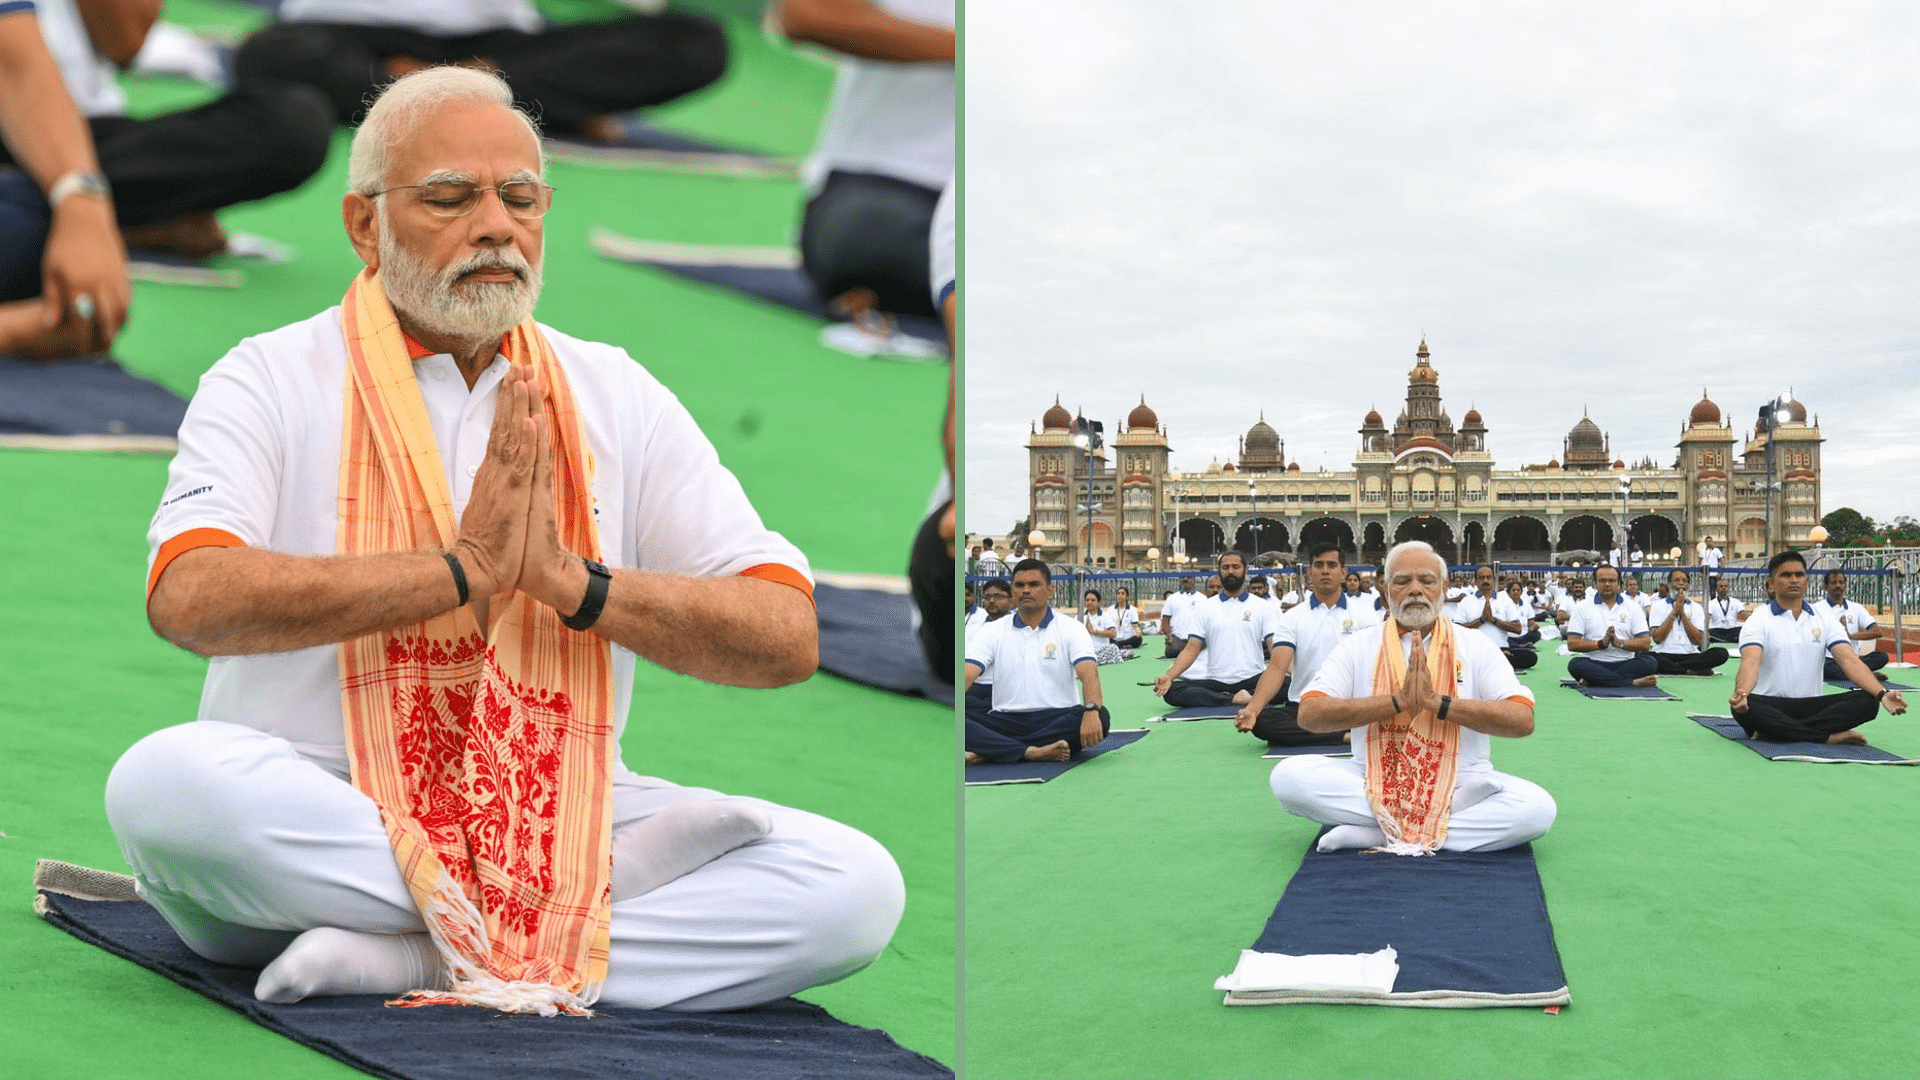 <div class="paragraphs"><p>Prime Minister <a href="https://www.thequint.com/topic/narendra-modi">Narendra Modi</a> arrived on Tuesday morning, 21 June, at Mysuru Palace Ground where he took part in a mass yoga demonstration on the eighth <a href="https://www.thequint.com/topic/international-yoga-day">International Yoga Day</a>.</p></div>